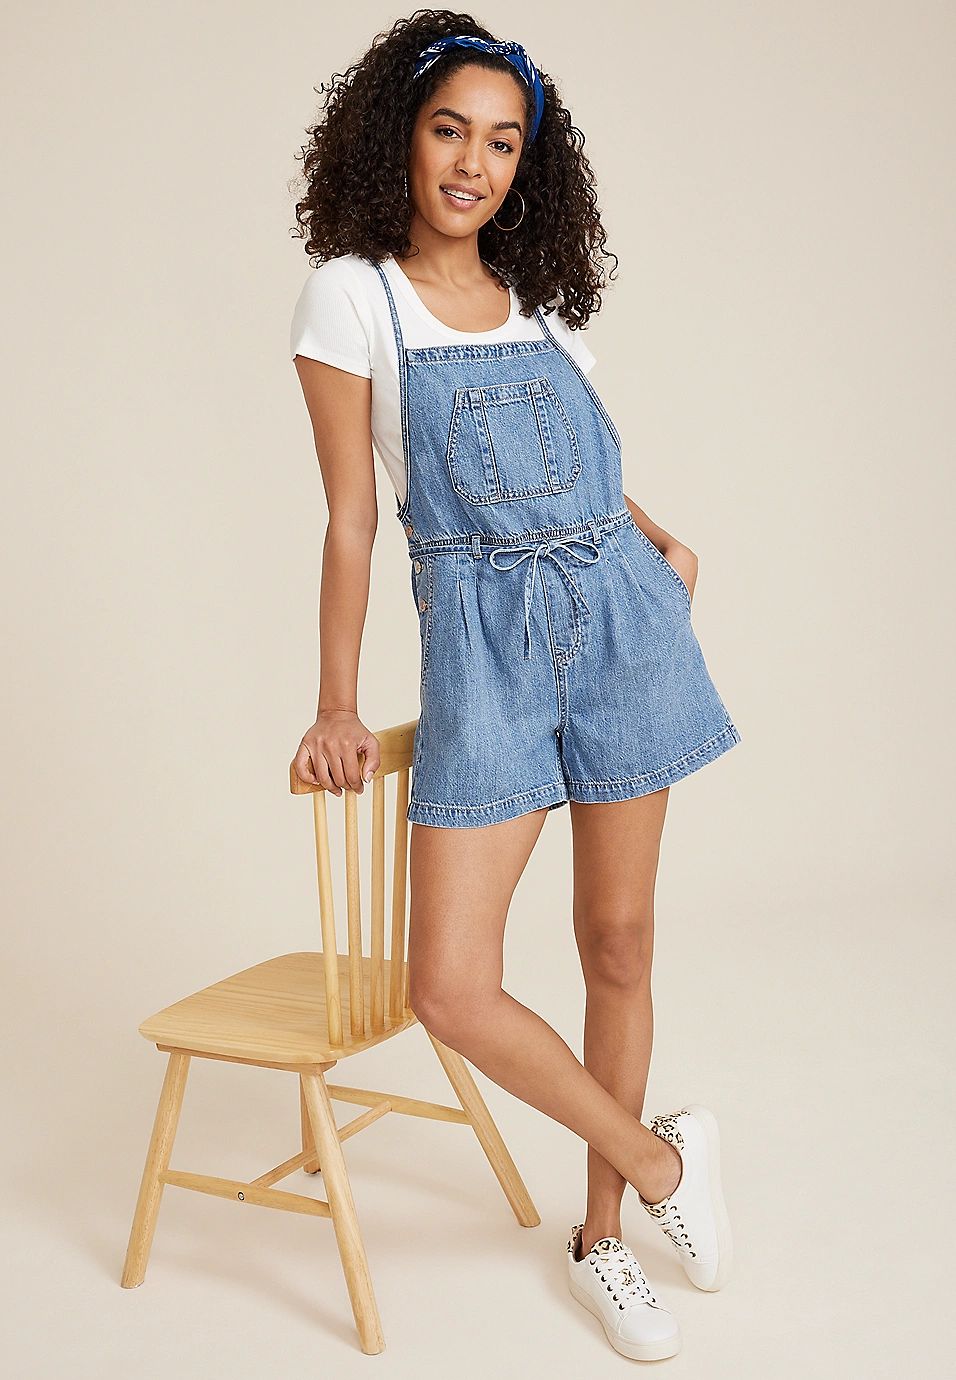 m jeans by maurices™ Soft Denim Shortall | Maurices